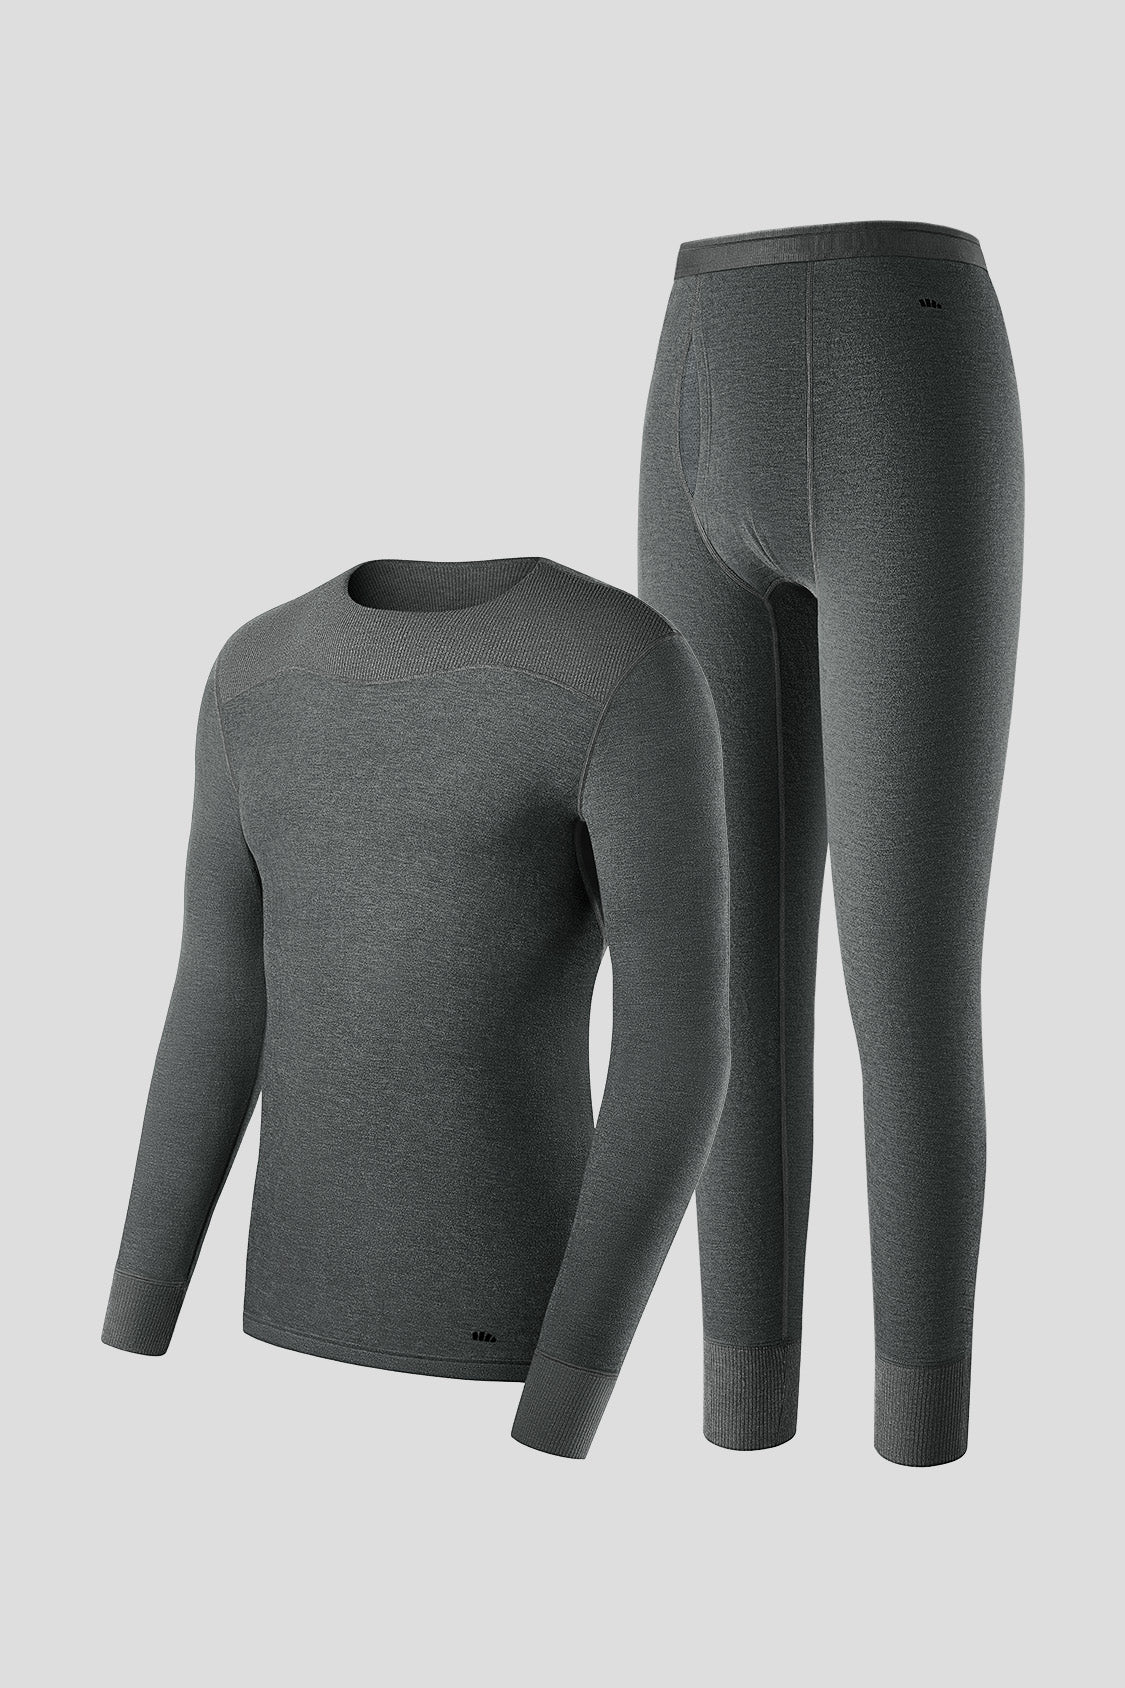 Men's Seamless Solid Color Thermal Underwear Set Made Of Acrylic Fiber